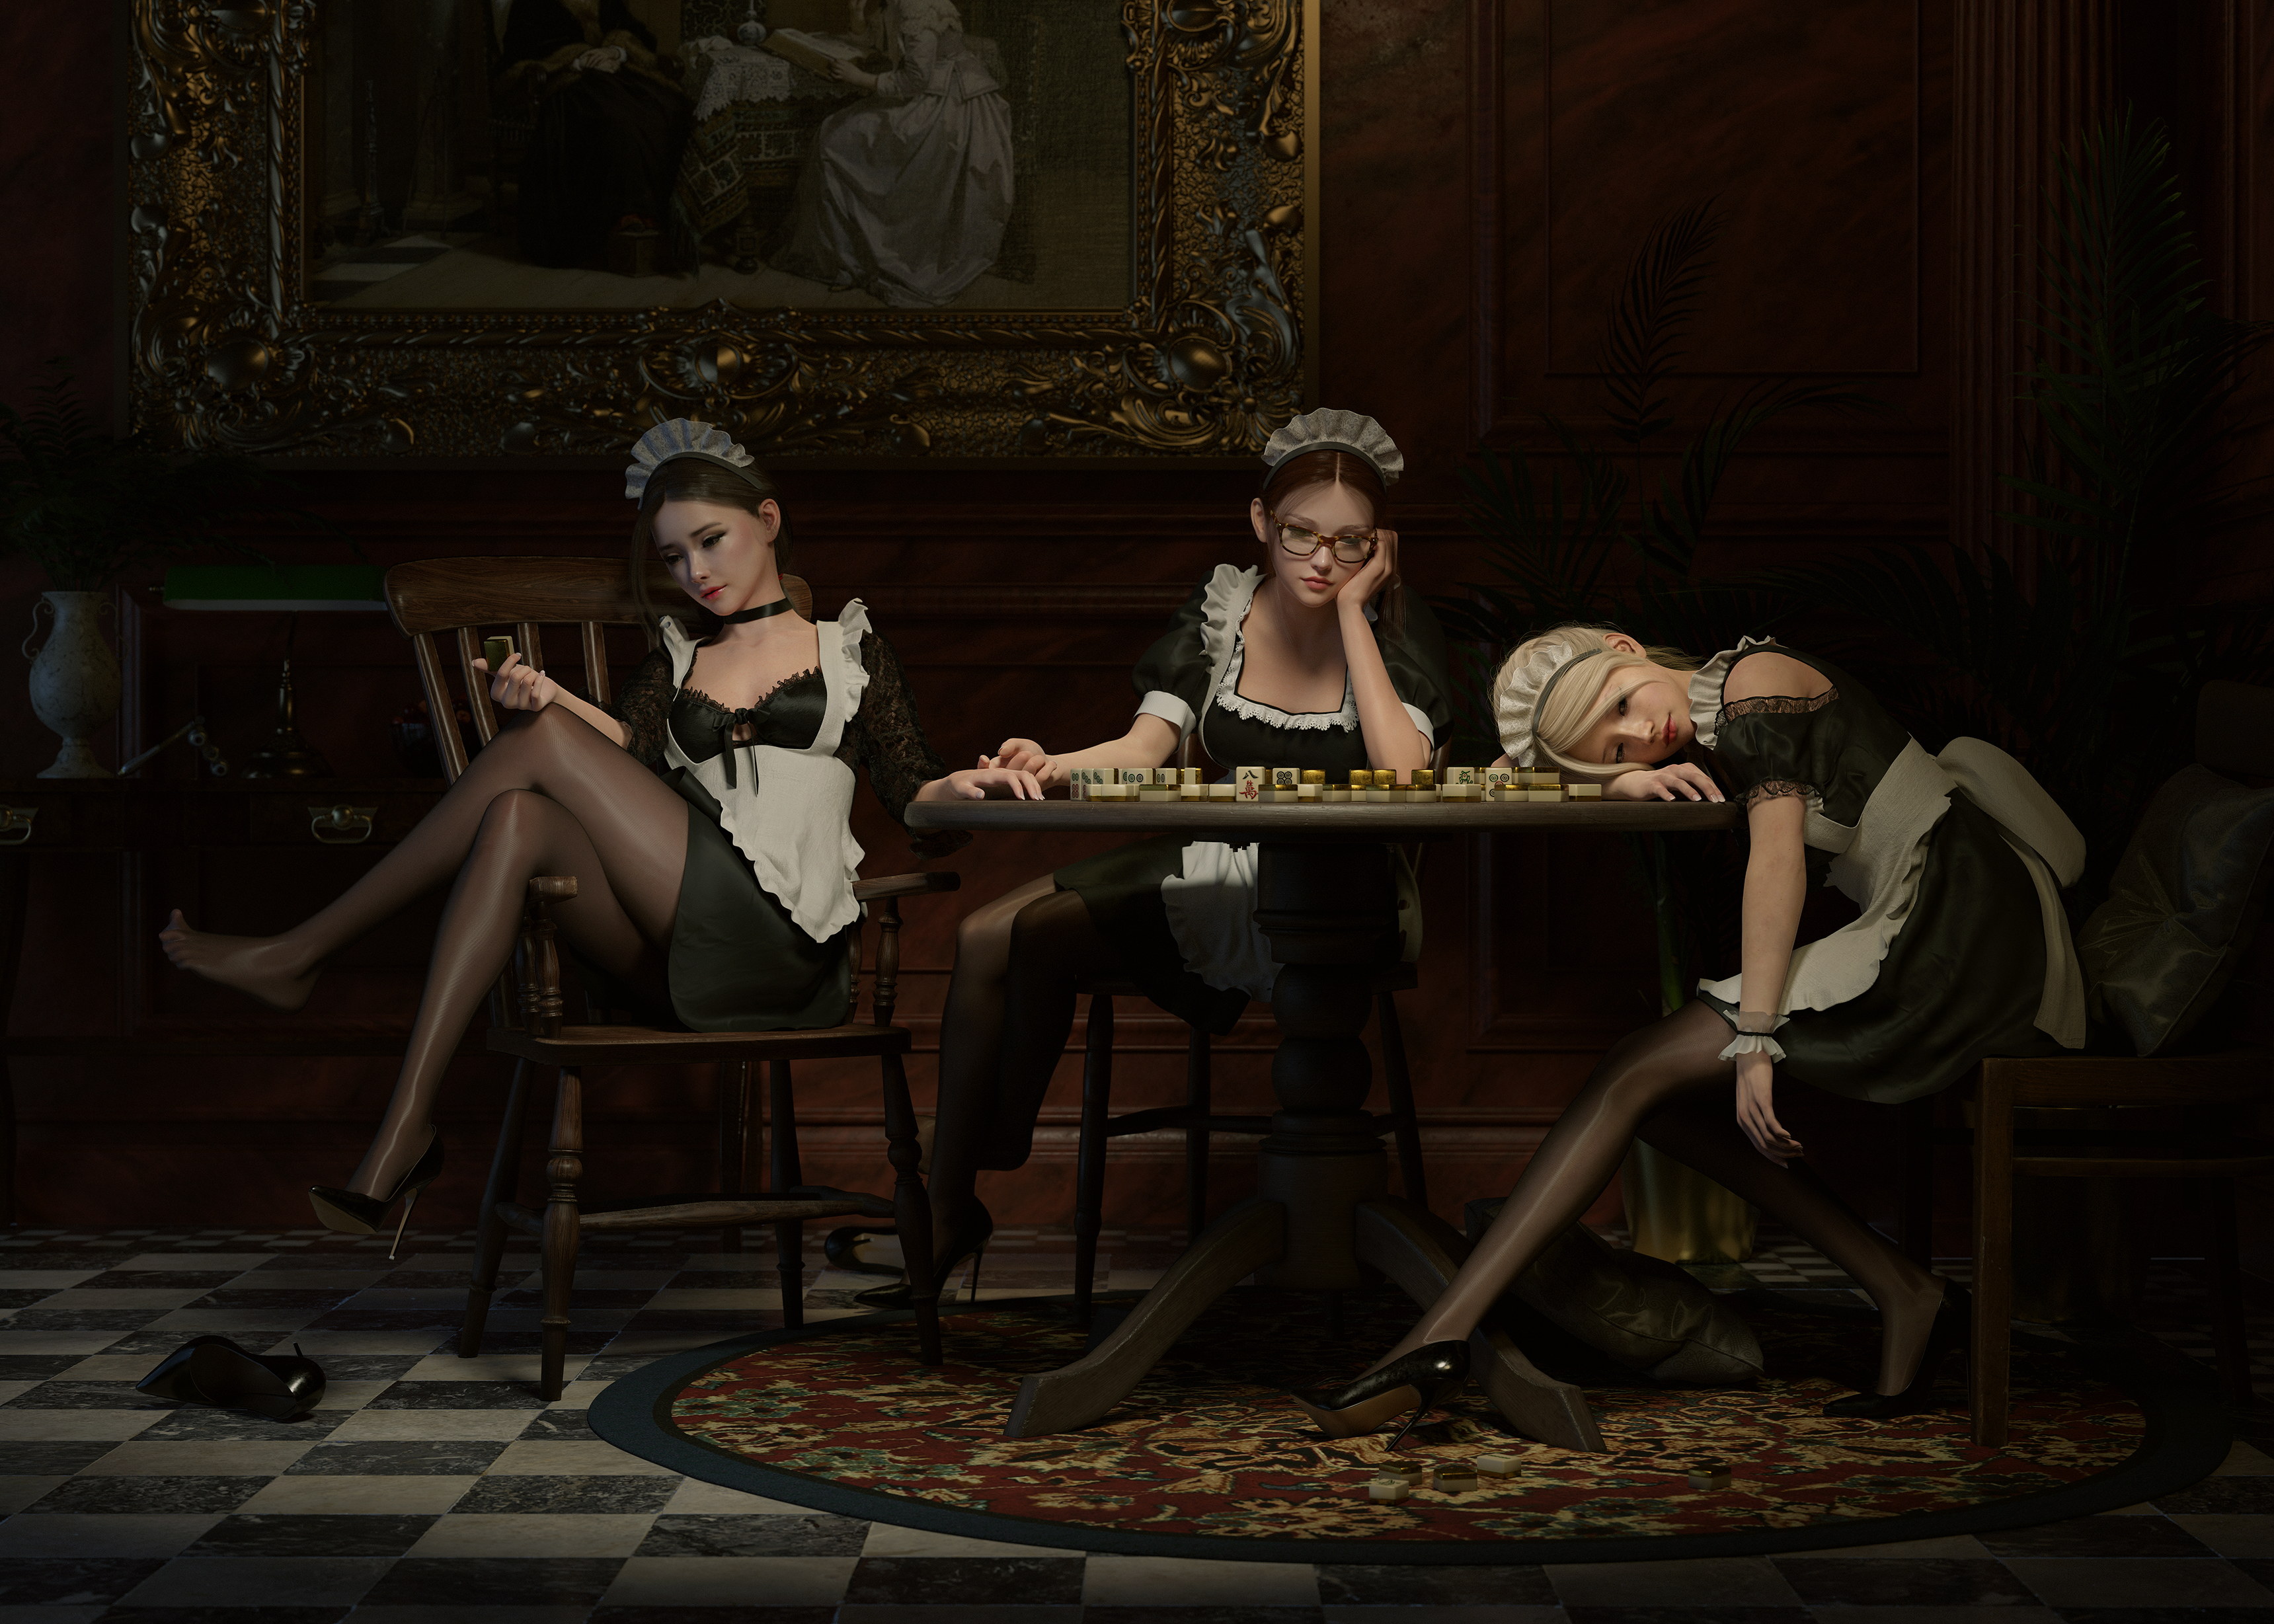 General 3440x2457 maid digital art women original characters CGI Lou LL table maid outfit sitting checkered legs crossed mahjong board games pantyhose chair indoors women indoors glasses choker hand on face black heels stockings